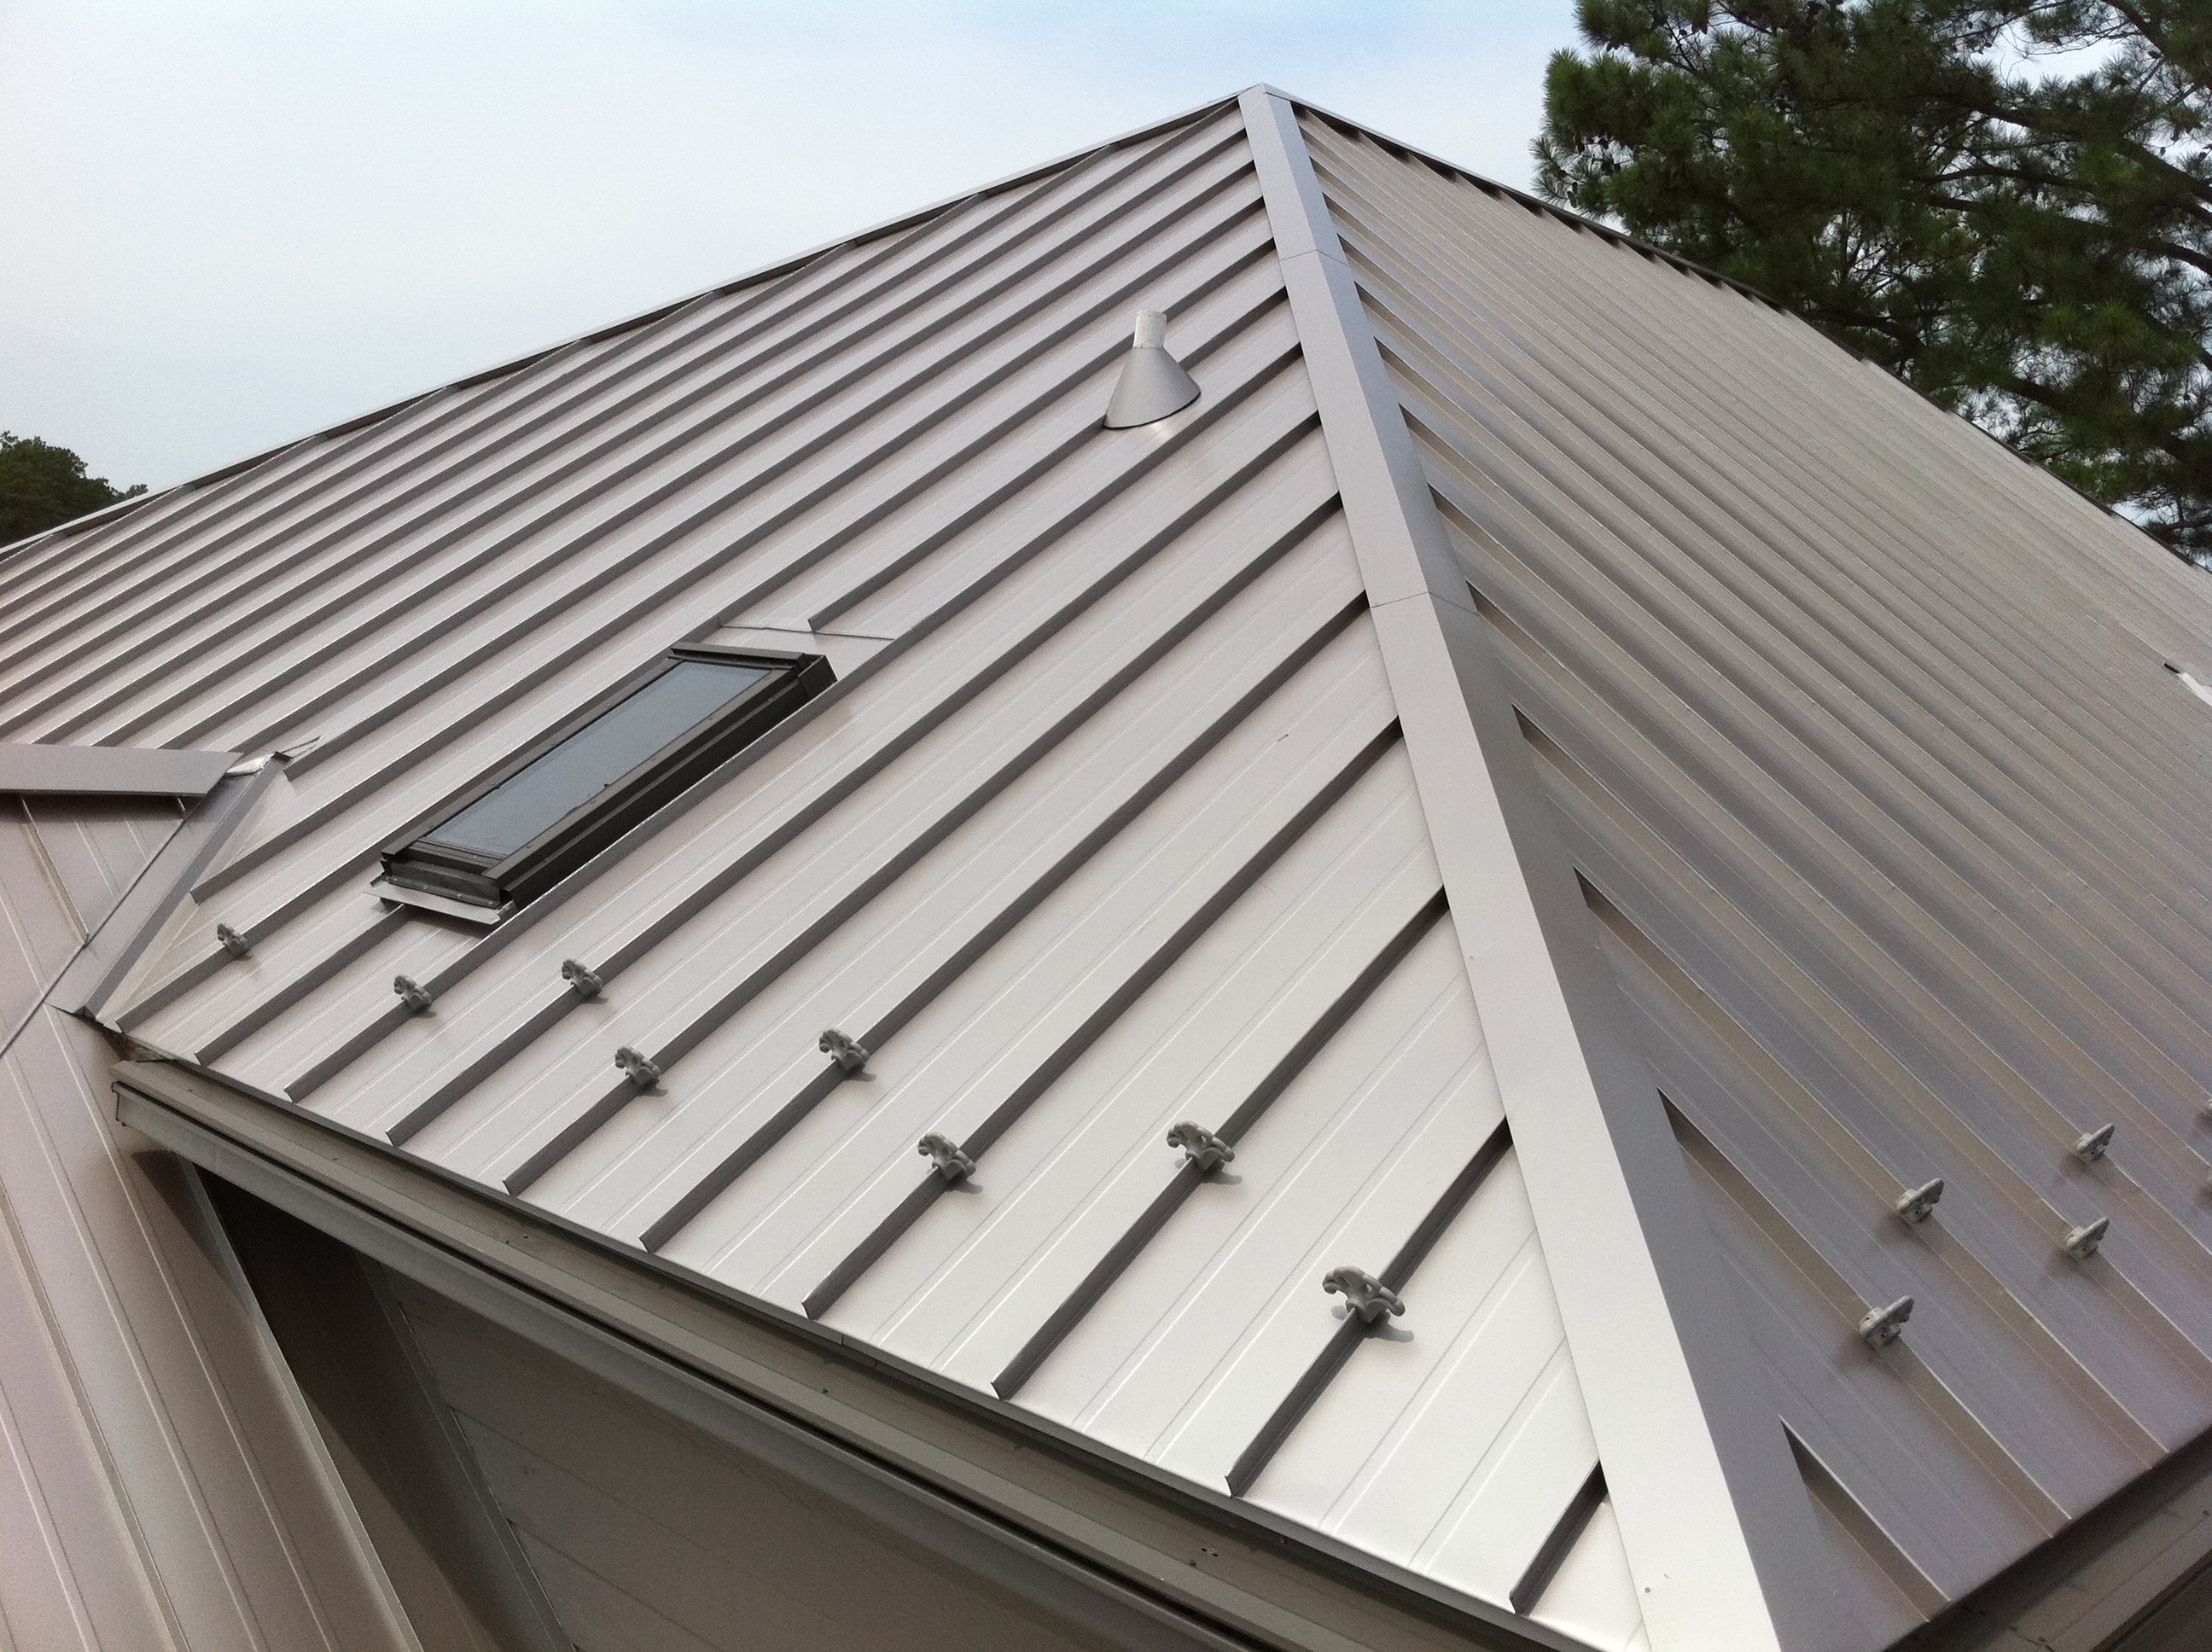 7-reasons-to-install-a-standing-seam-metal-roof-news-and-events-for